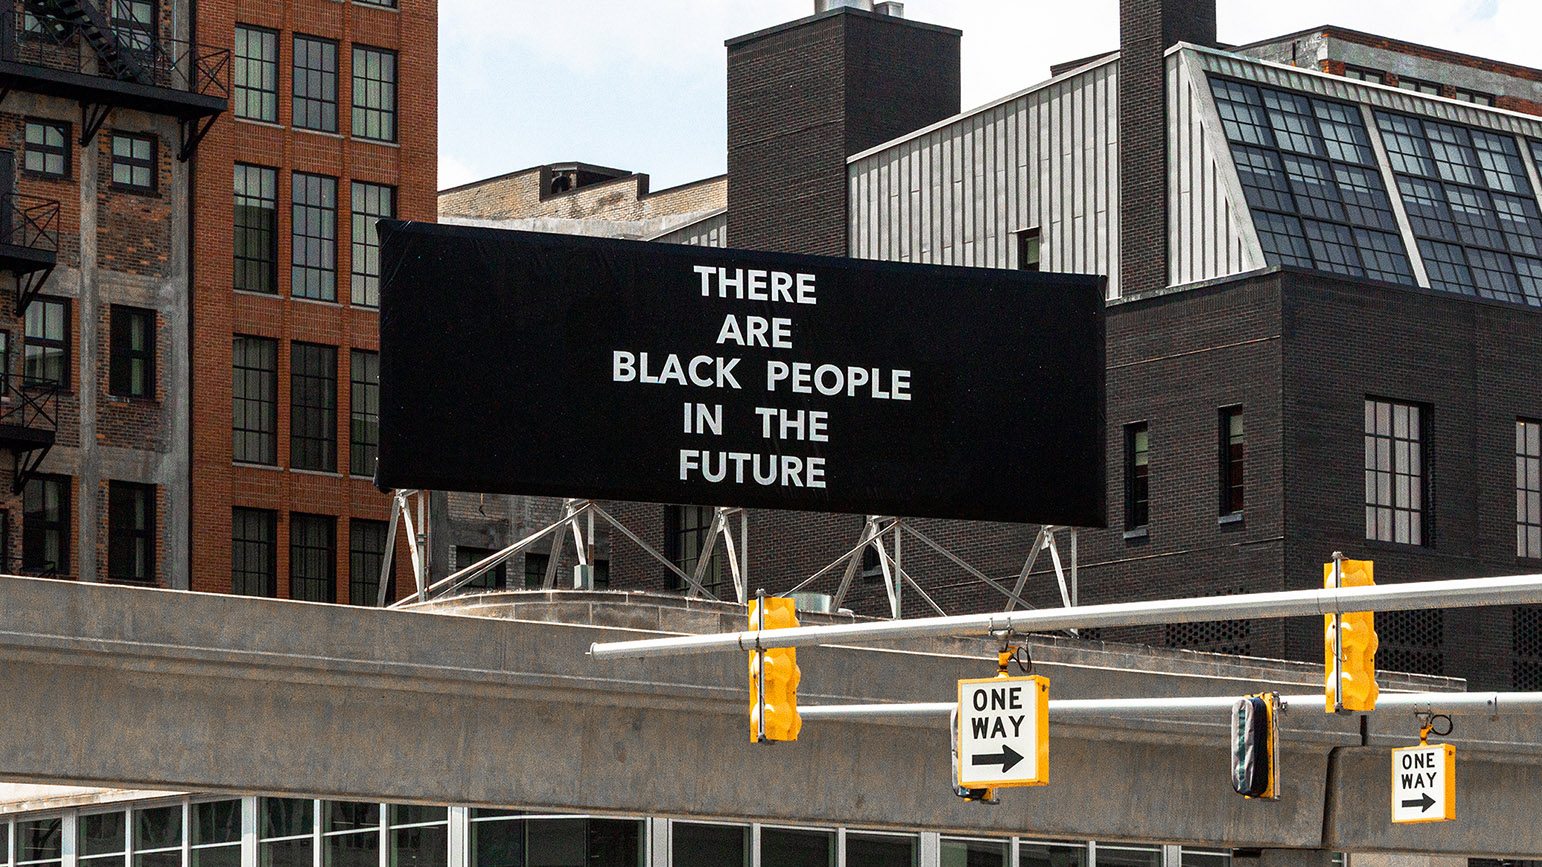 Photograph of a black billboard with the words "There Are Black People in the Future" written in white capital letters